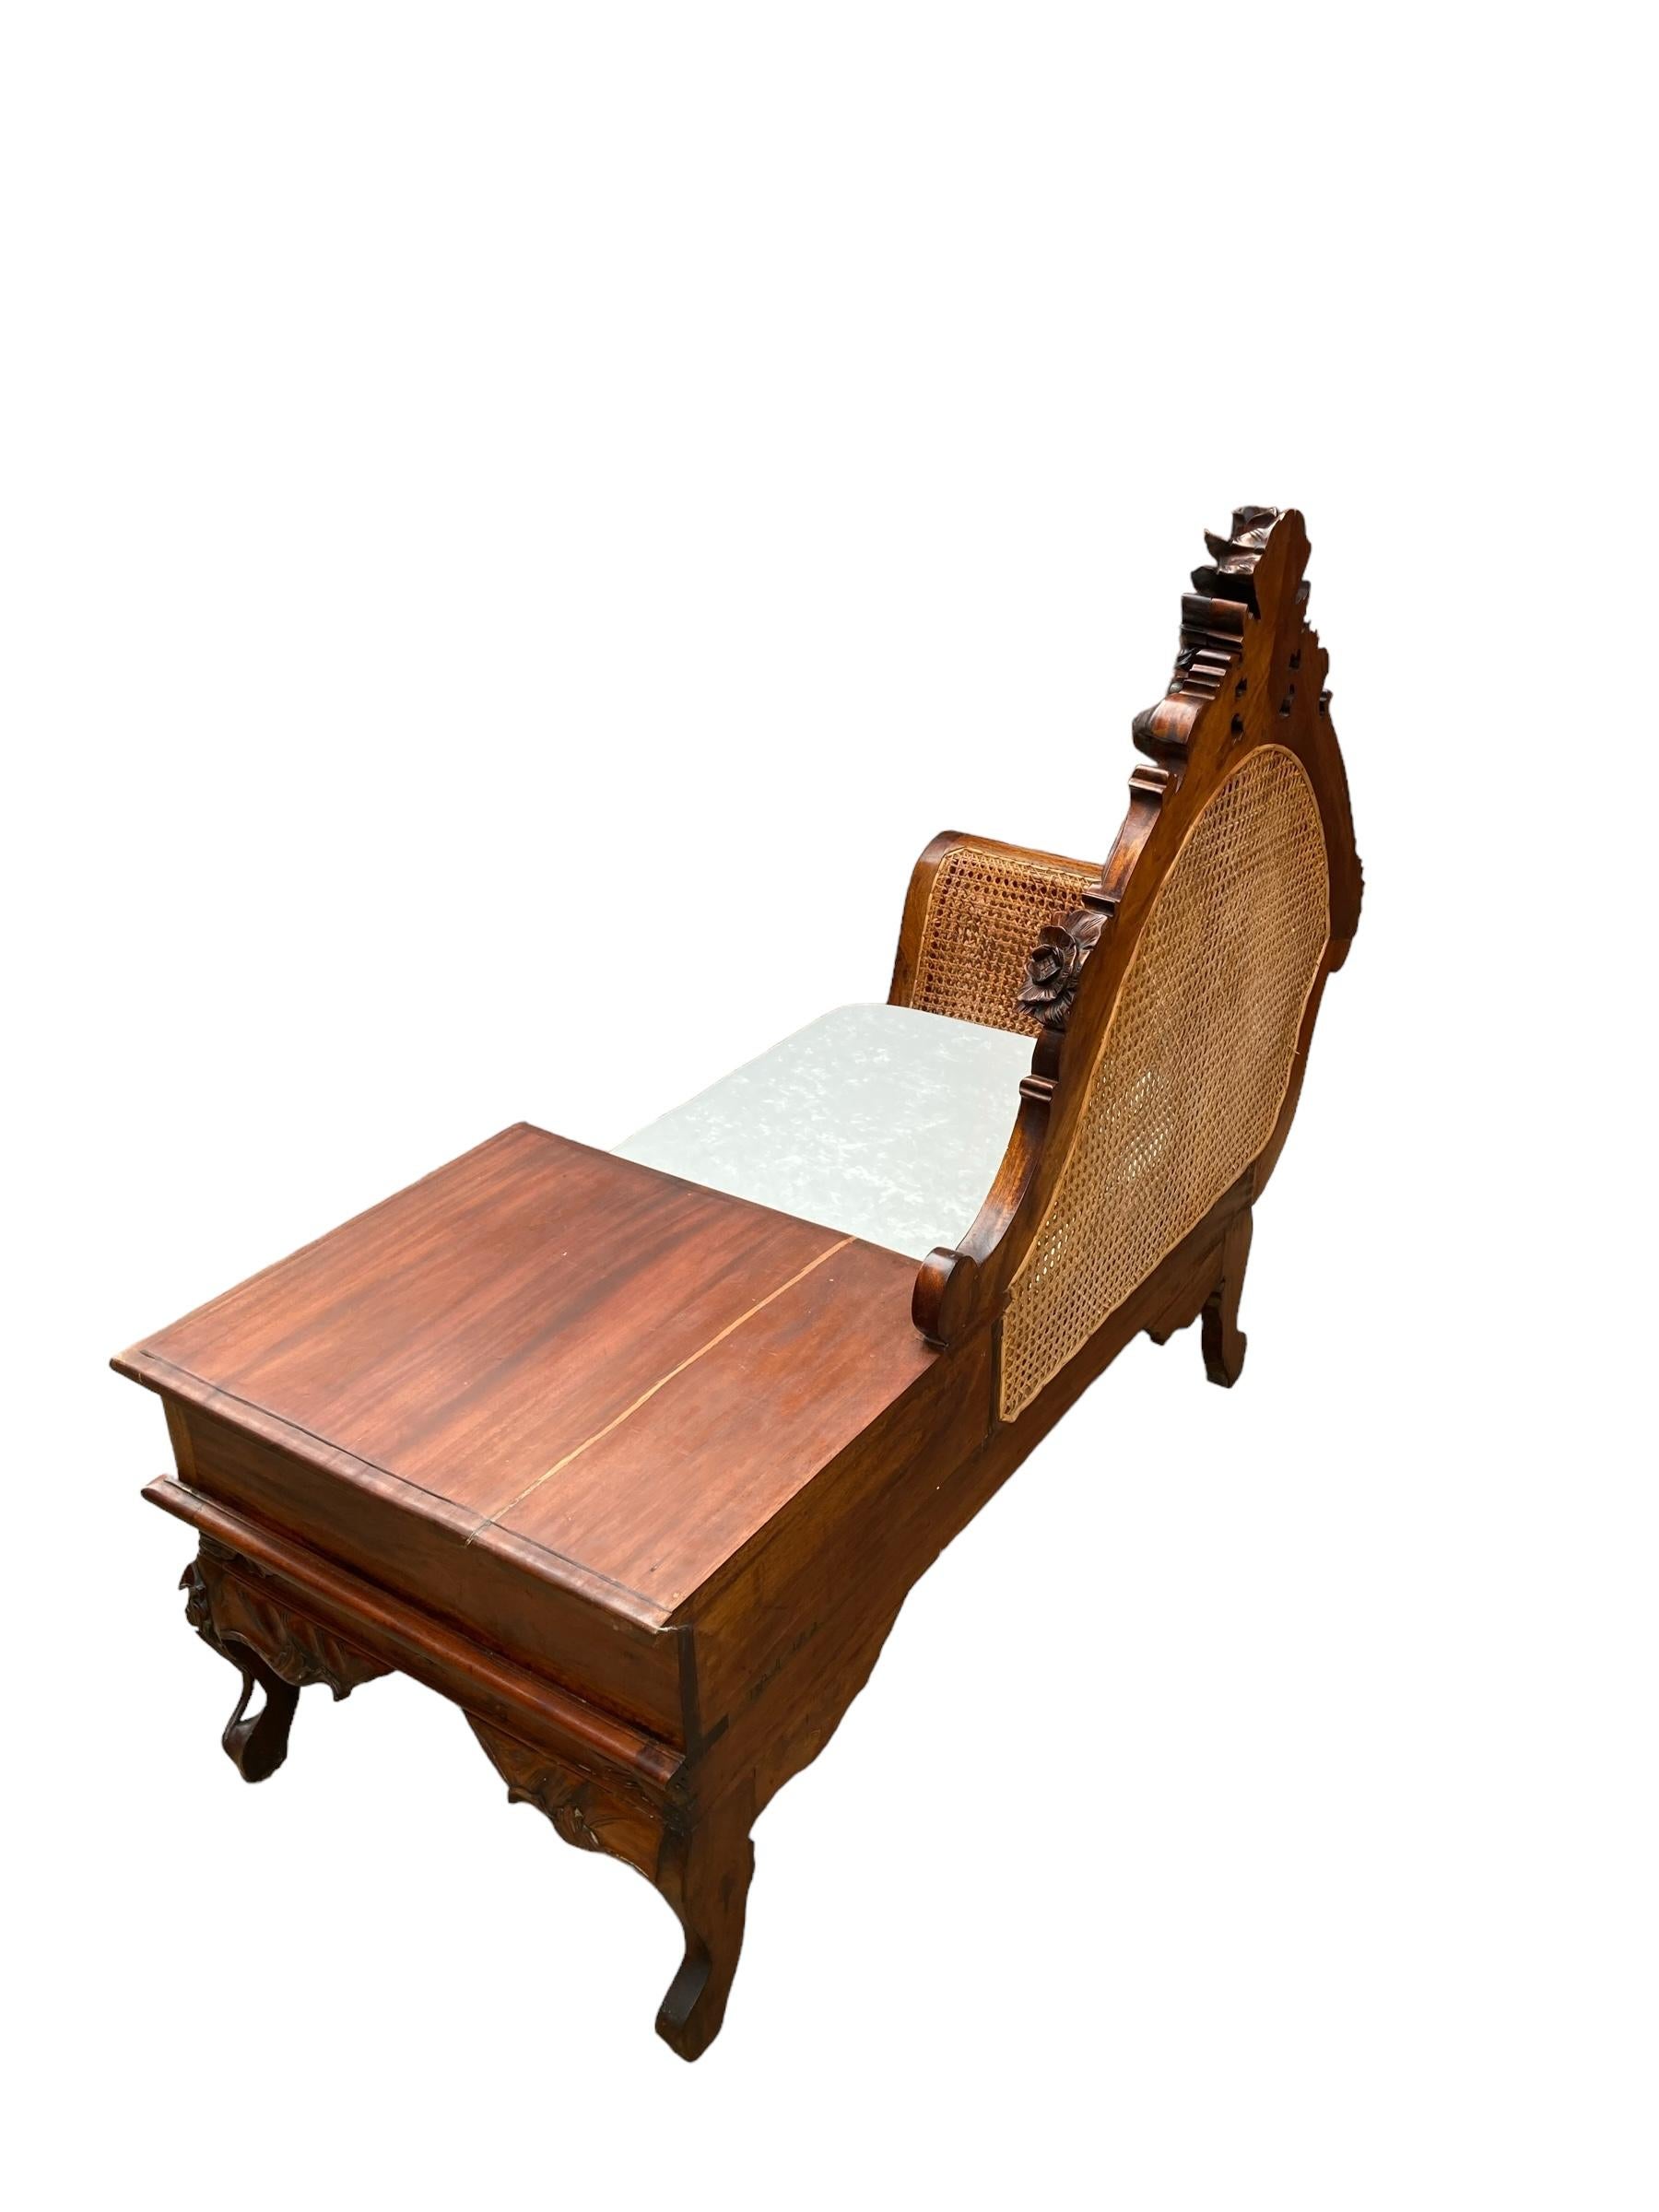 Original Hand Carved Mahogany Victorian Telephone or Gossip Bench, Bergere  For Sale 1